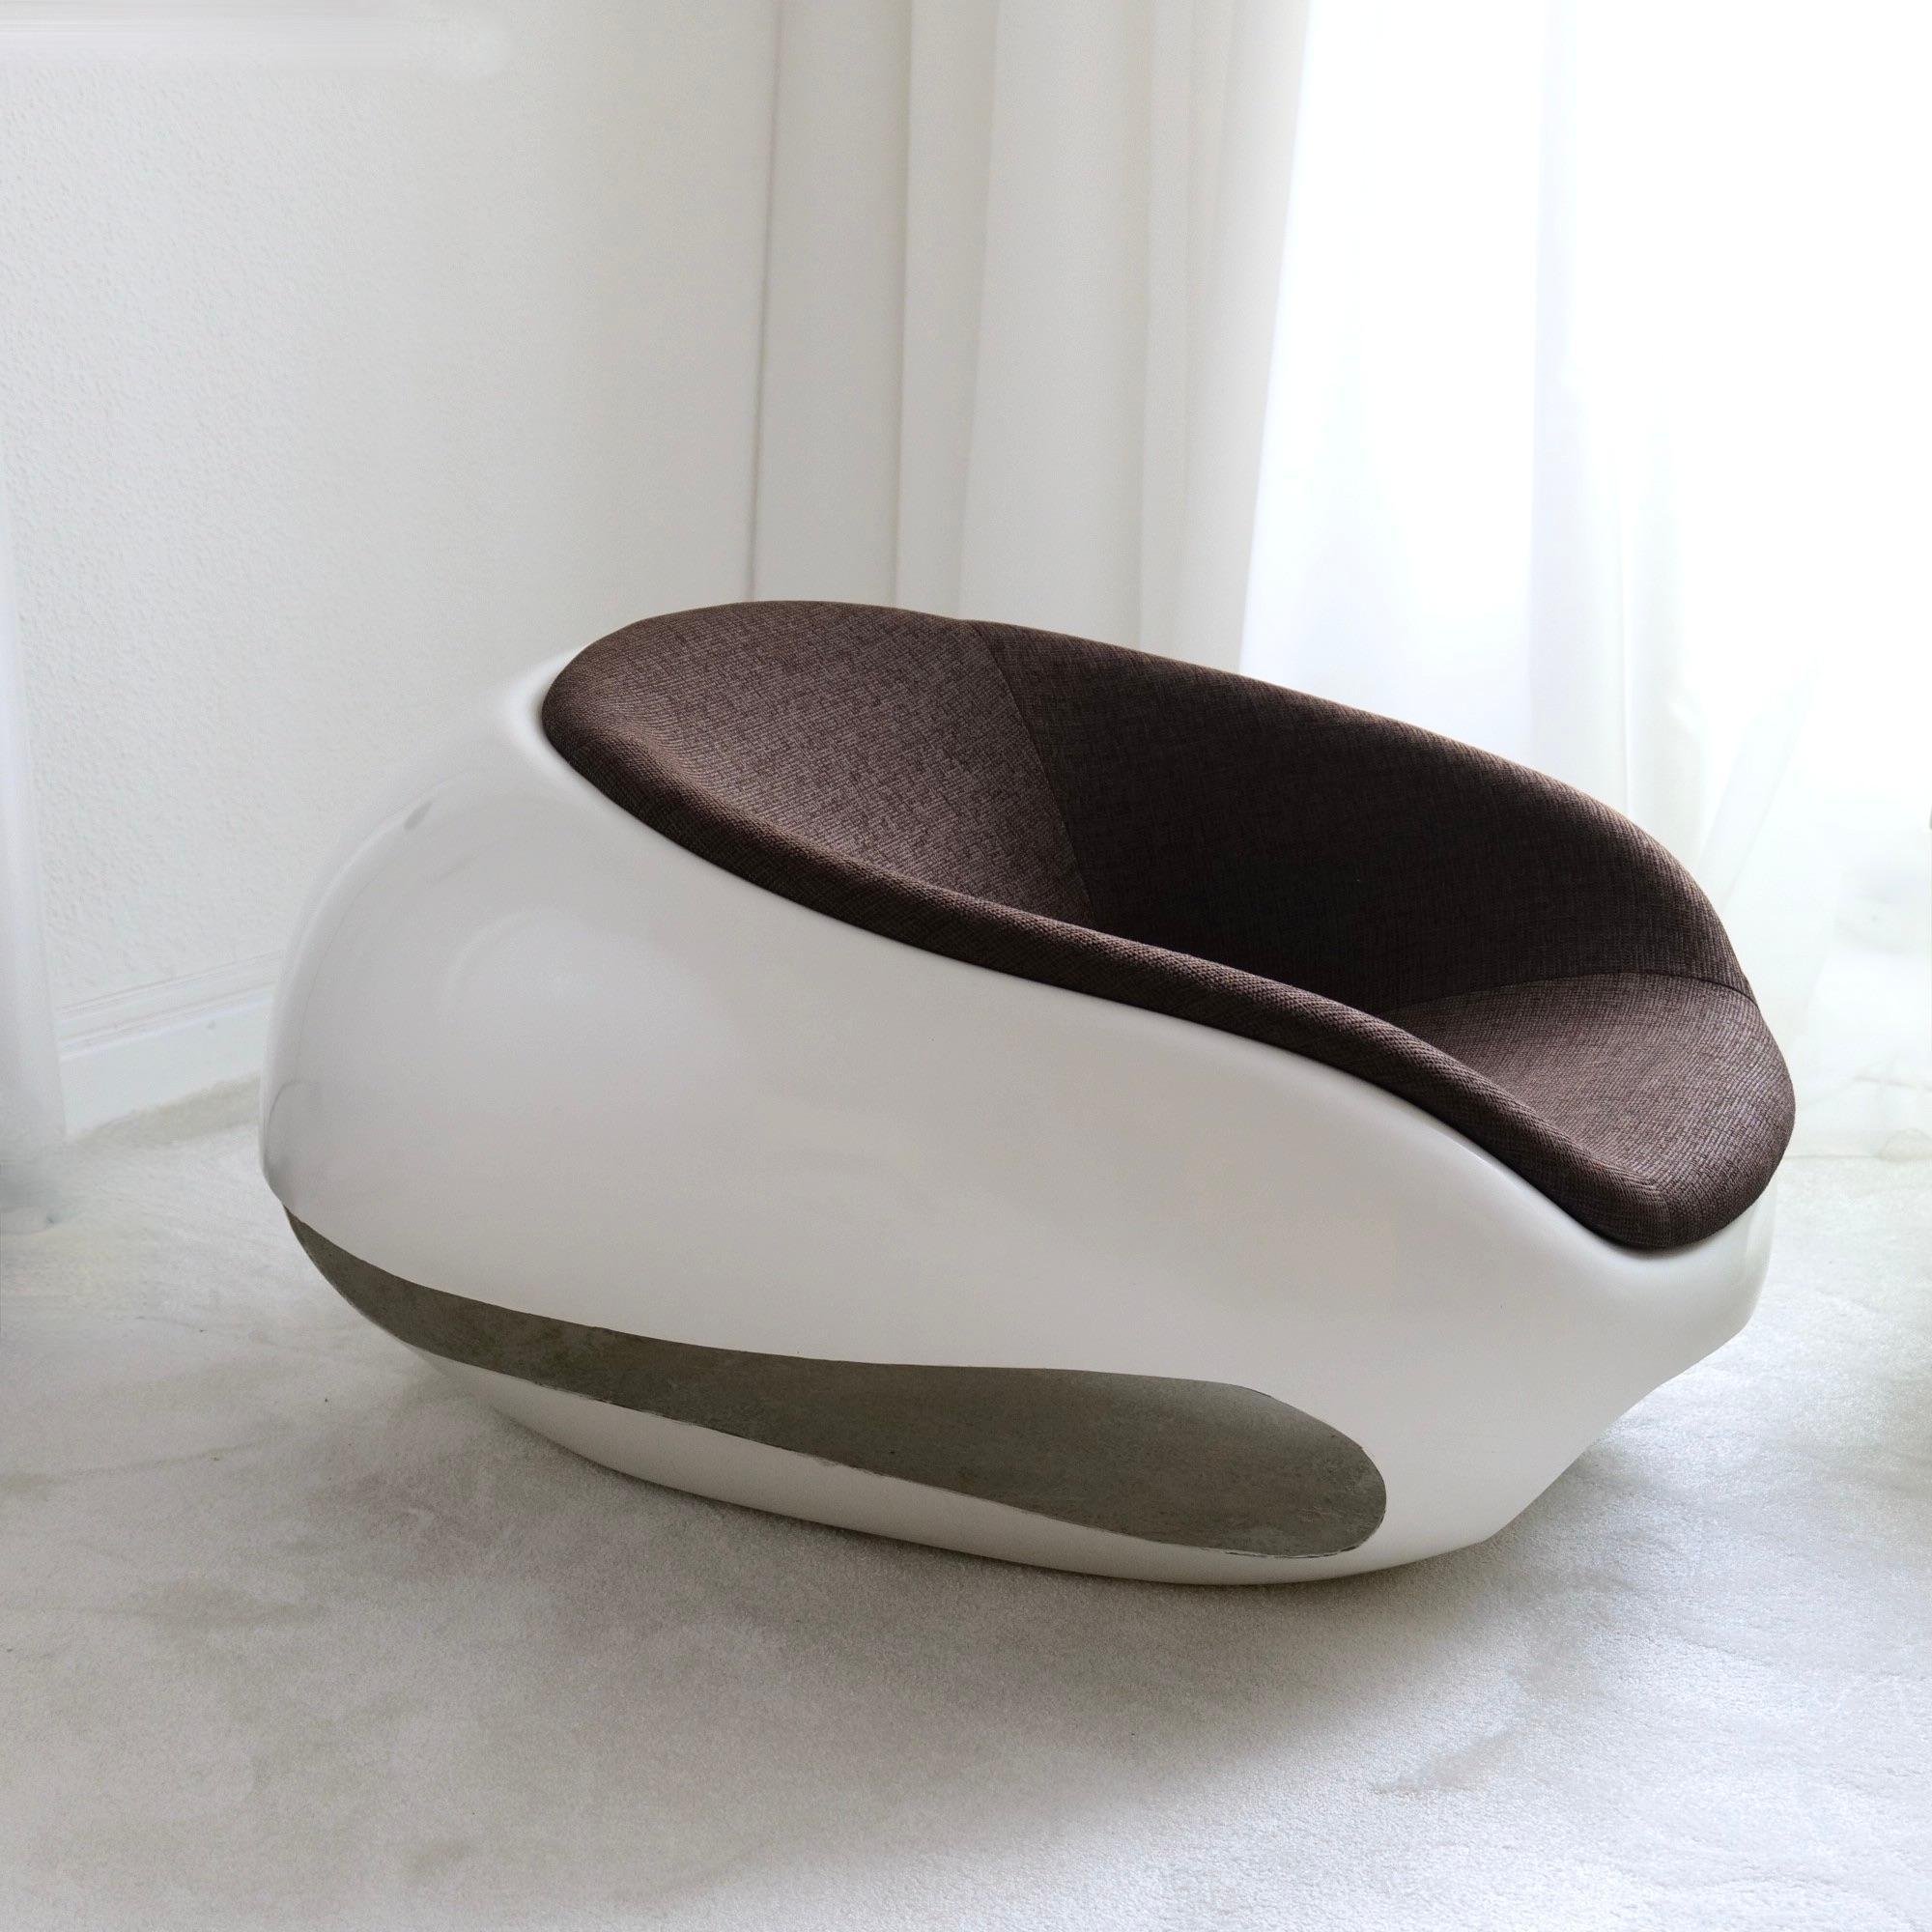 Space Age space age armchair by Mario Sabot Pod Chair - 1960s For Sale